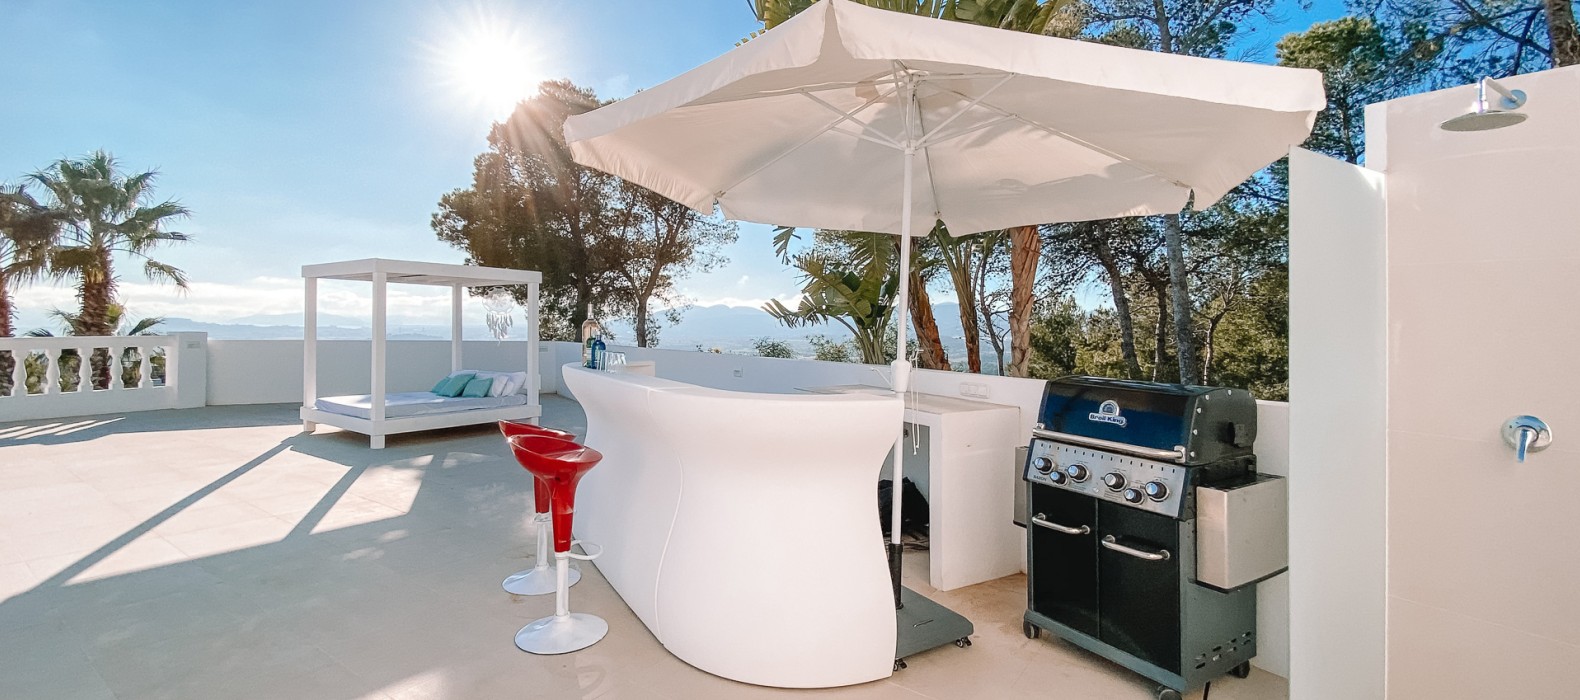 Exterior bar and bbq area of Villa The White Pearl in Ibiza